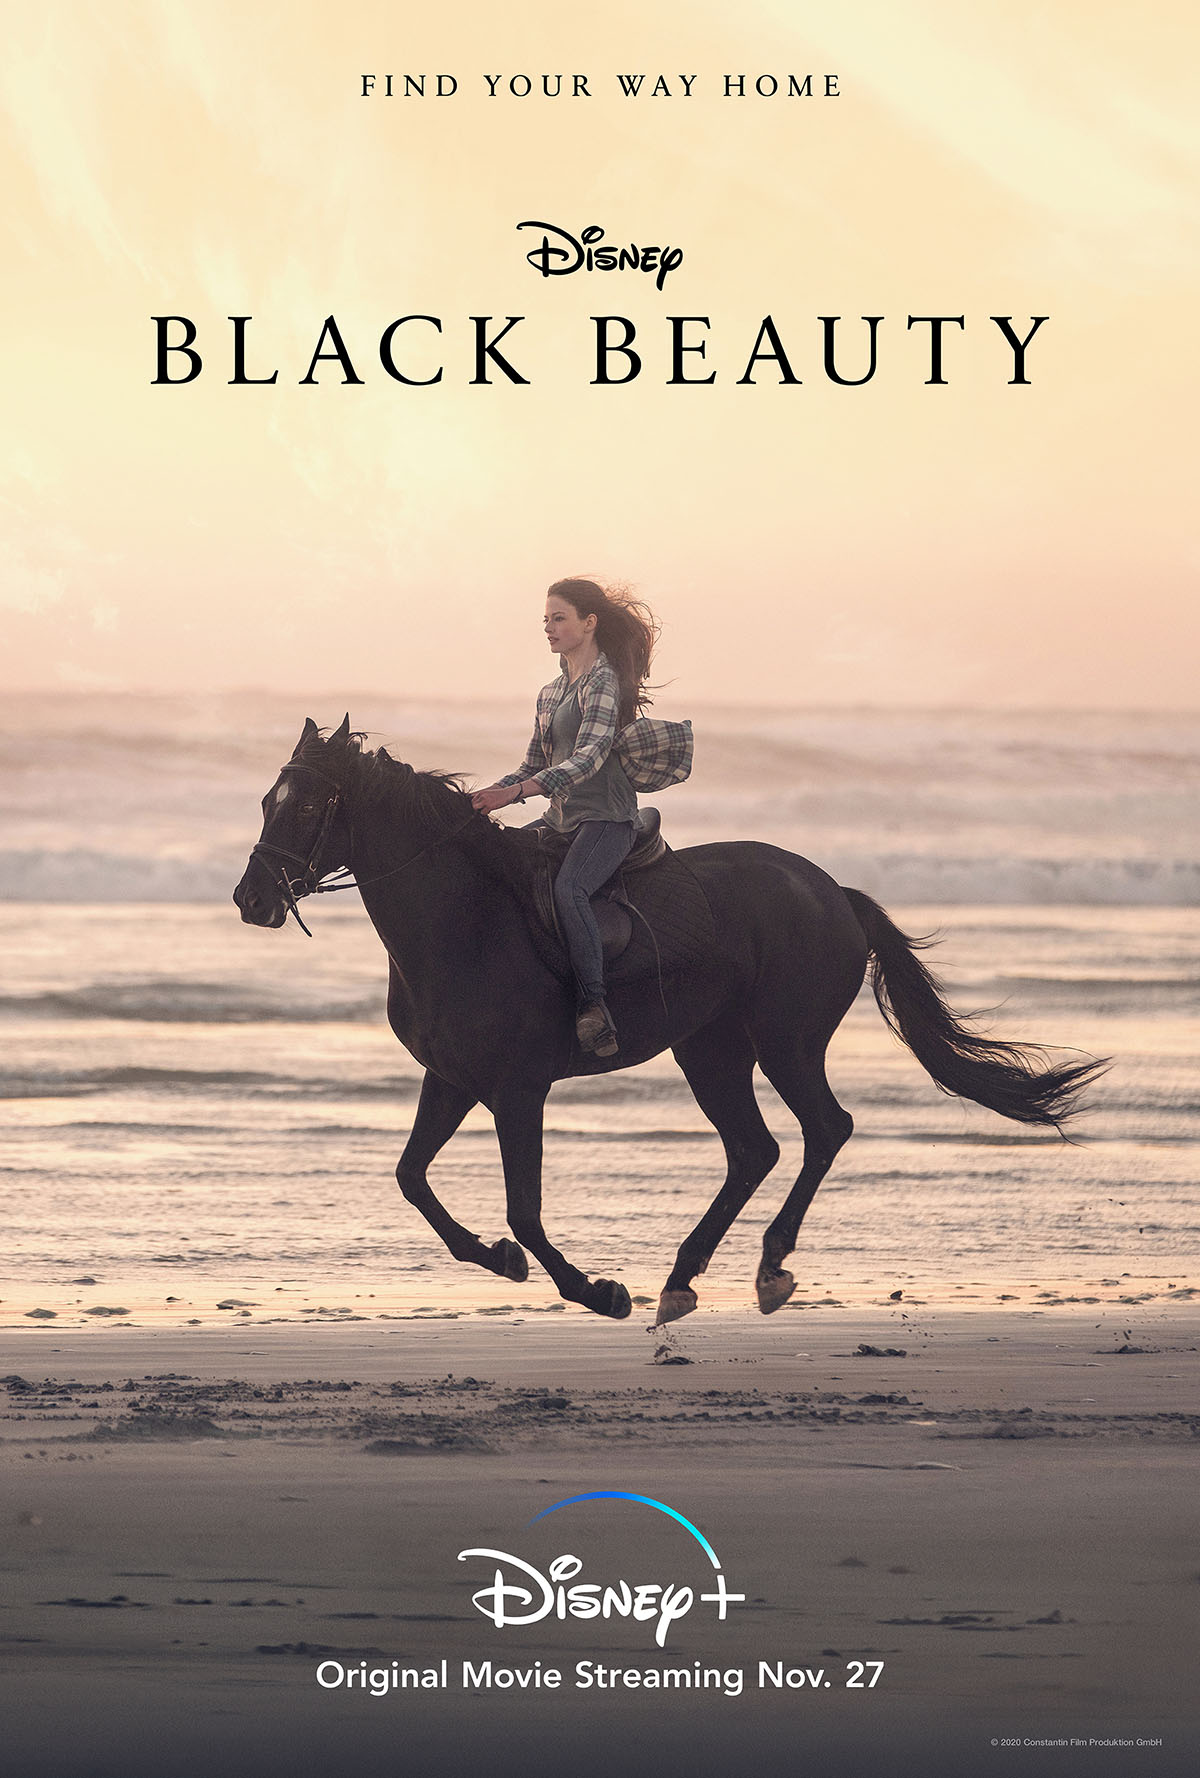 Disney's Black Beauty Film Cover - Cody Rawson-Harris was the expert movie horse trainer for this film.